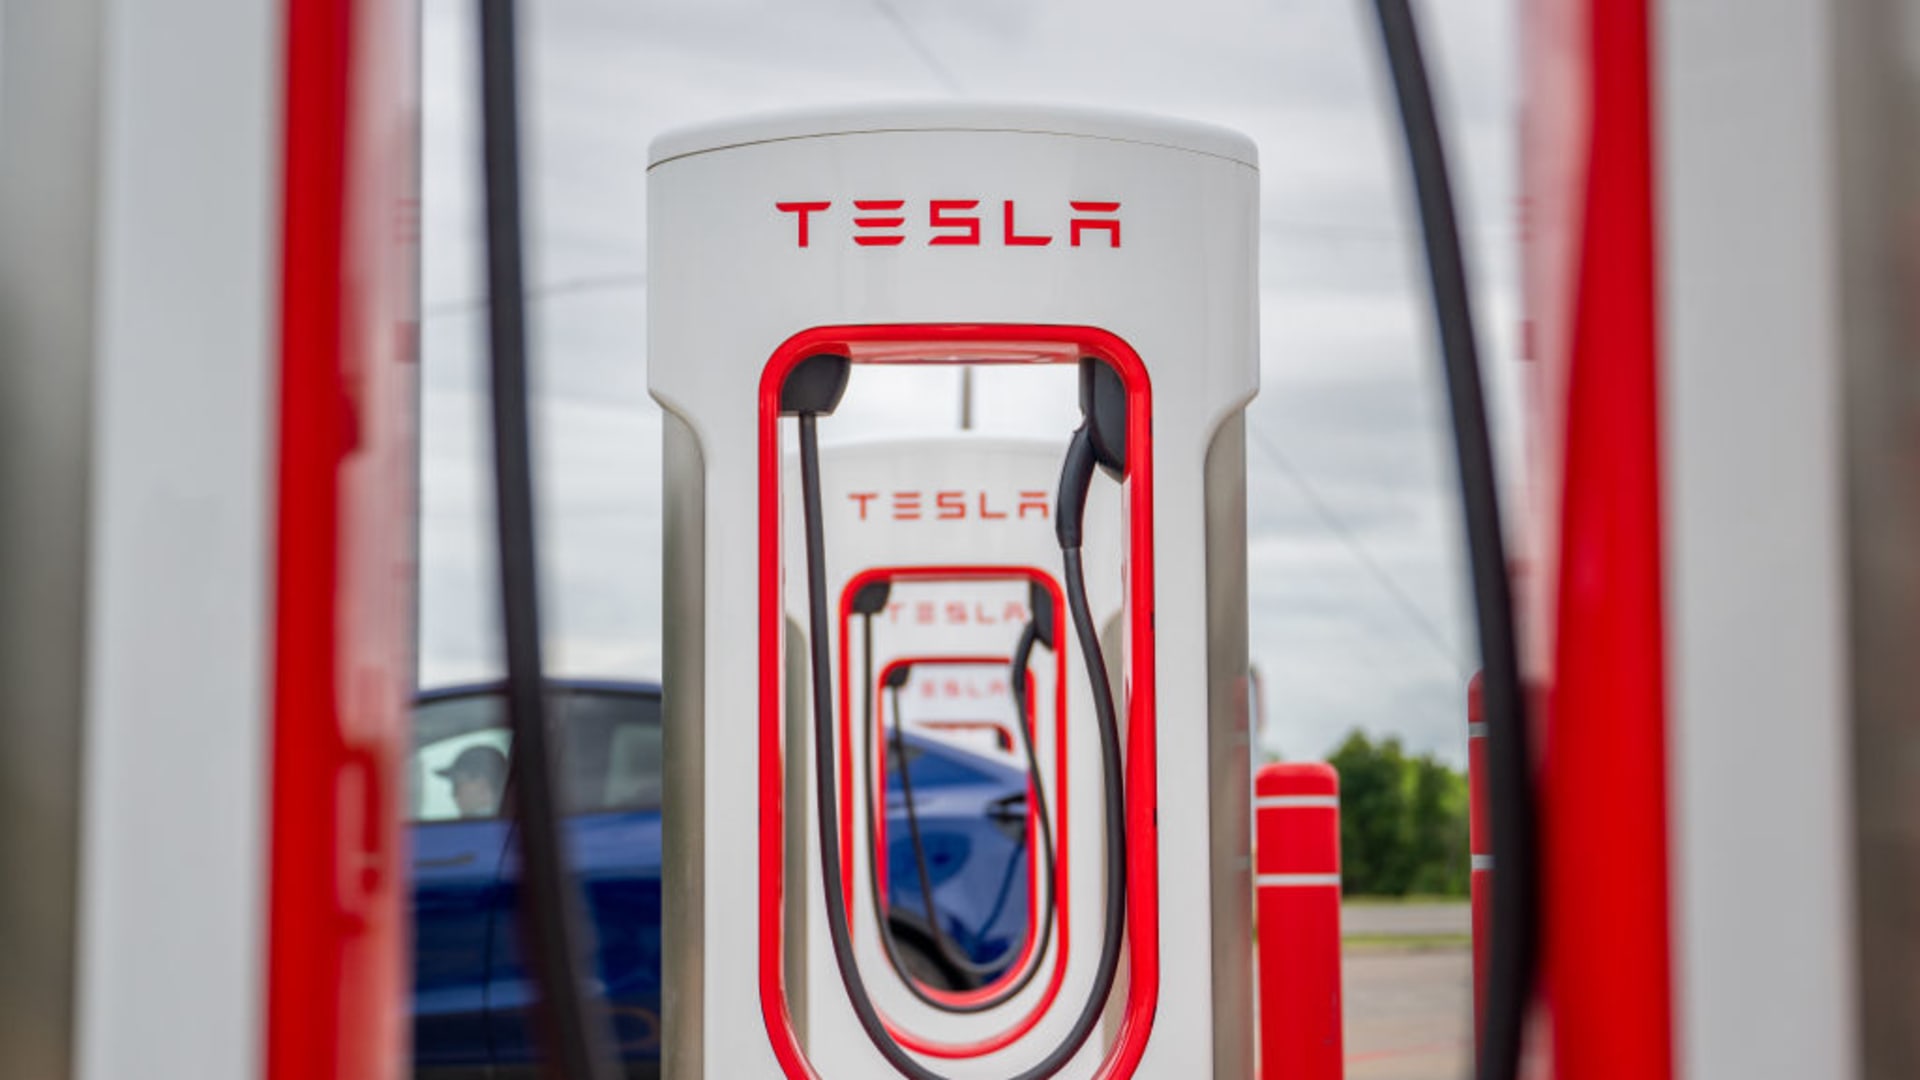 What to expect for Tesla’s Supercharger network now that the team is dismantled Auto Recent